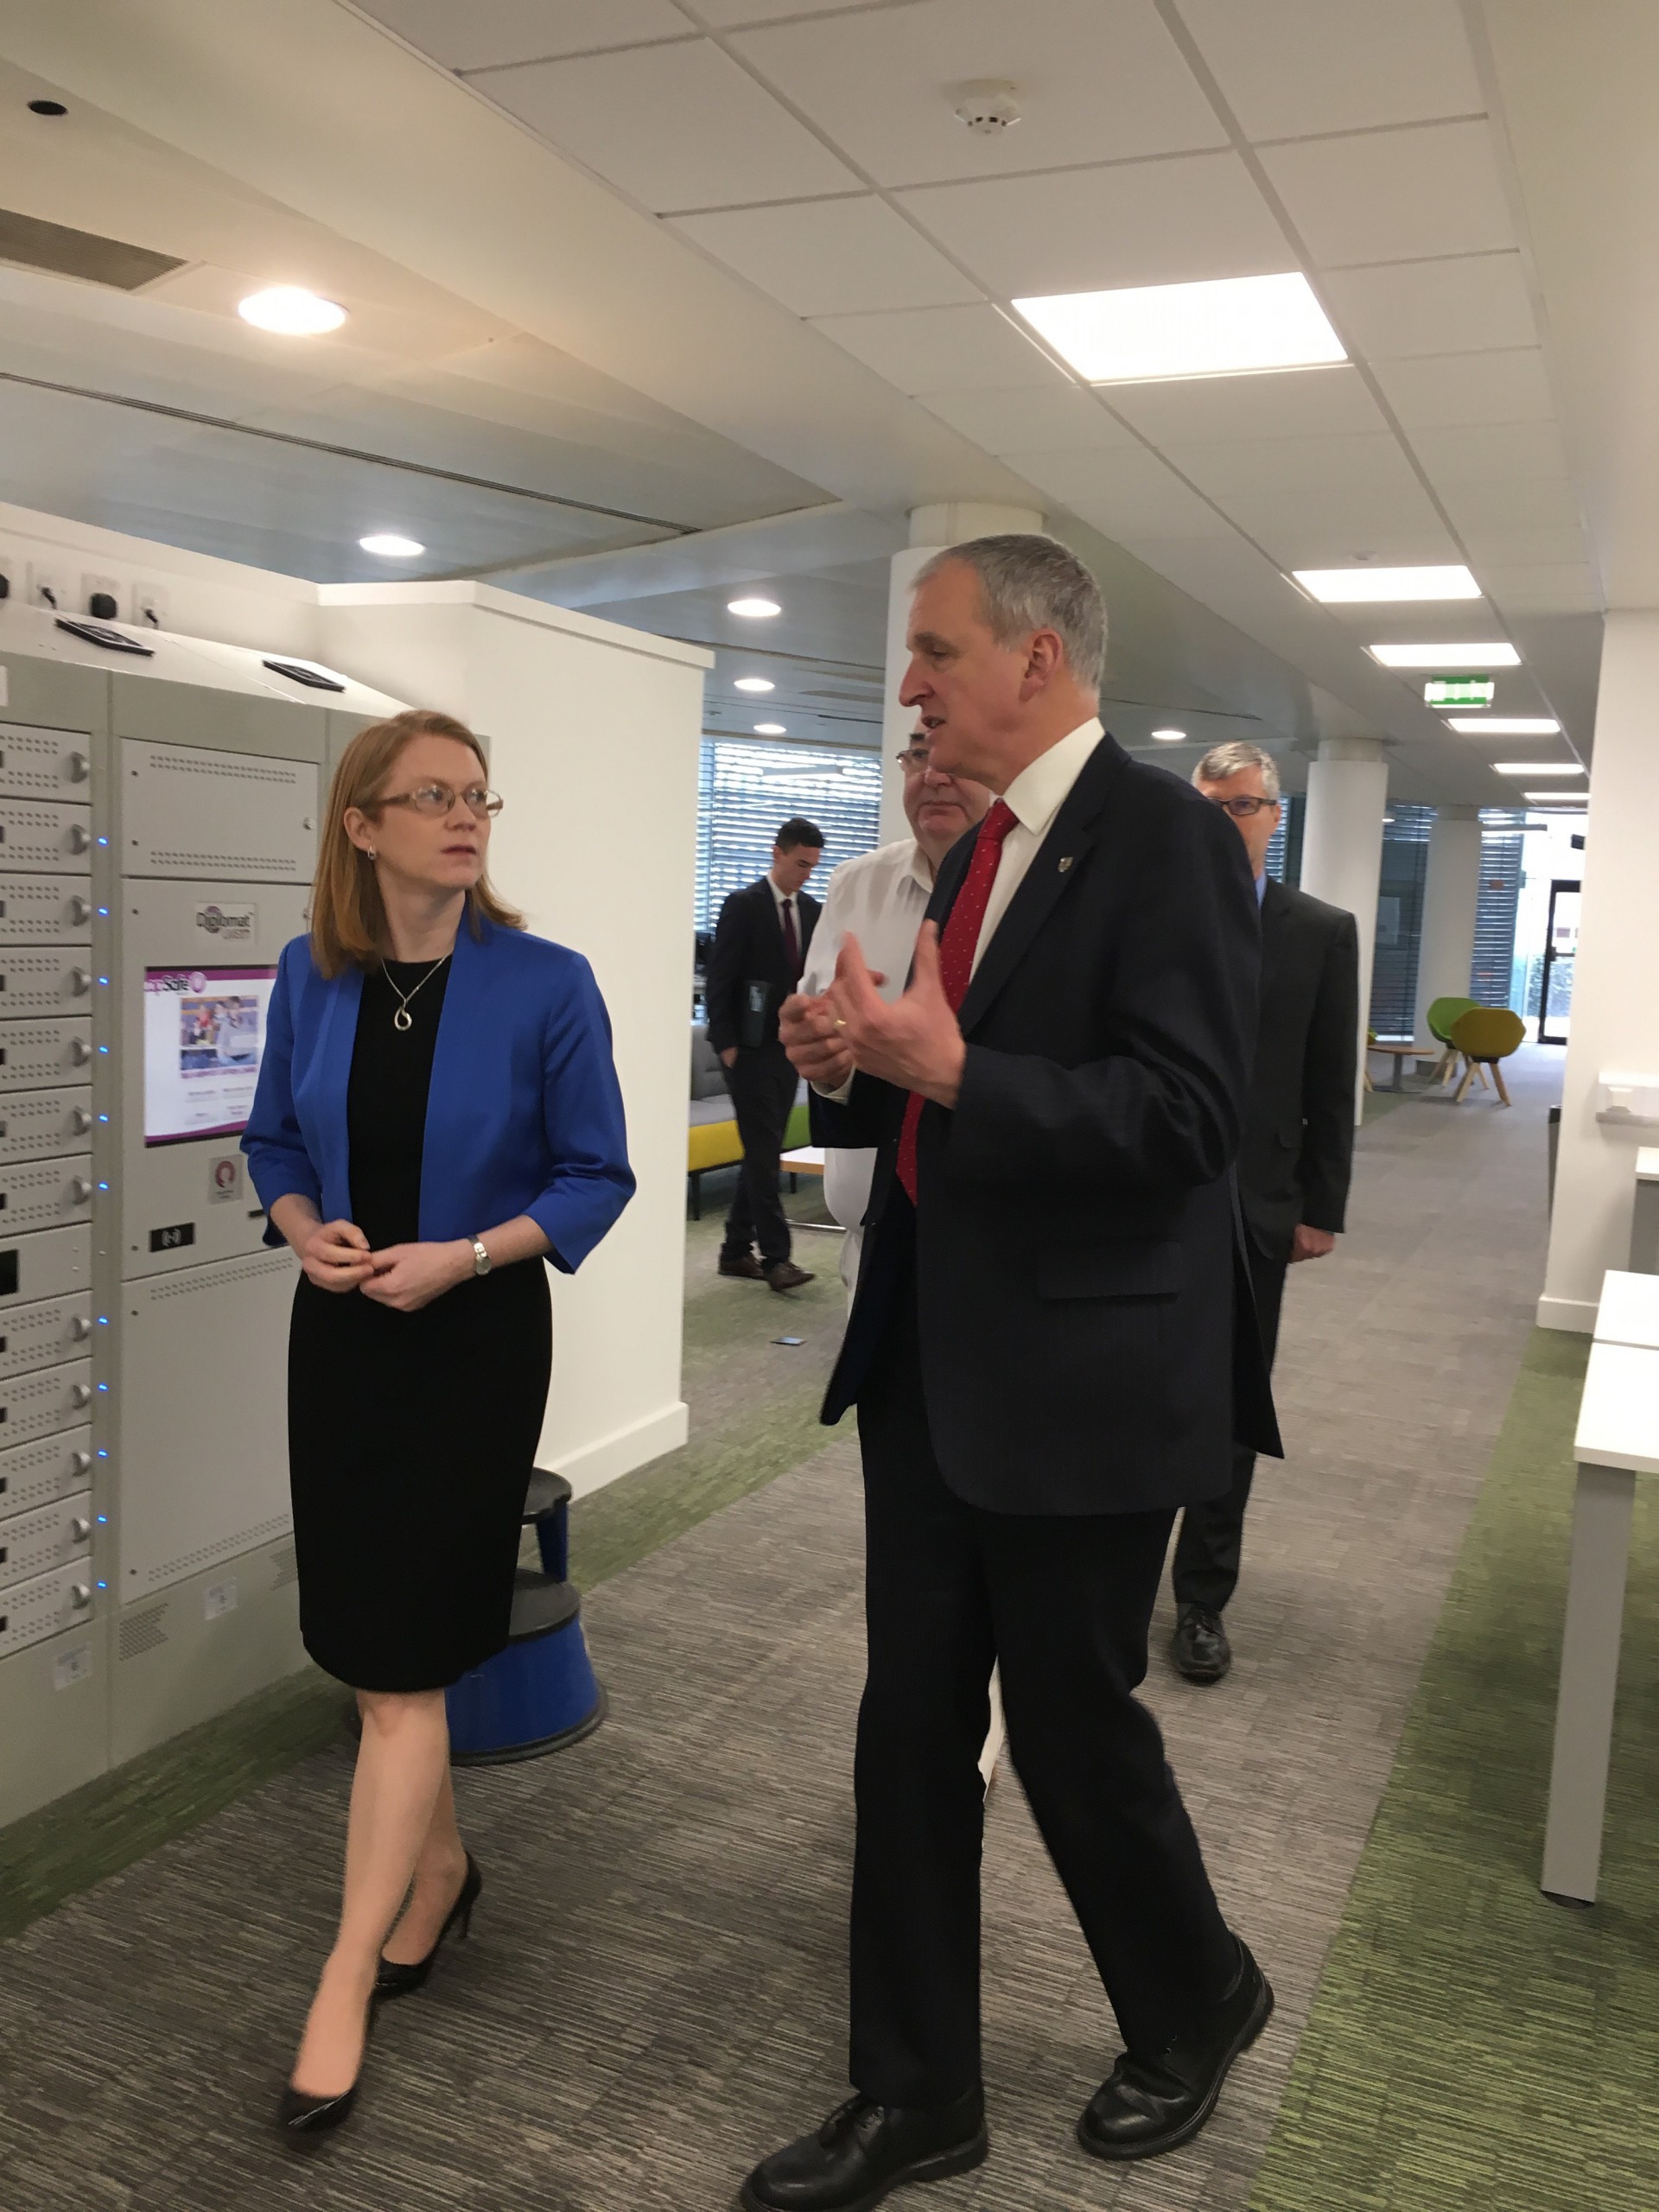 Scottish Minister Visits Abertay to Praise Introduction of Access Thresholds